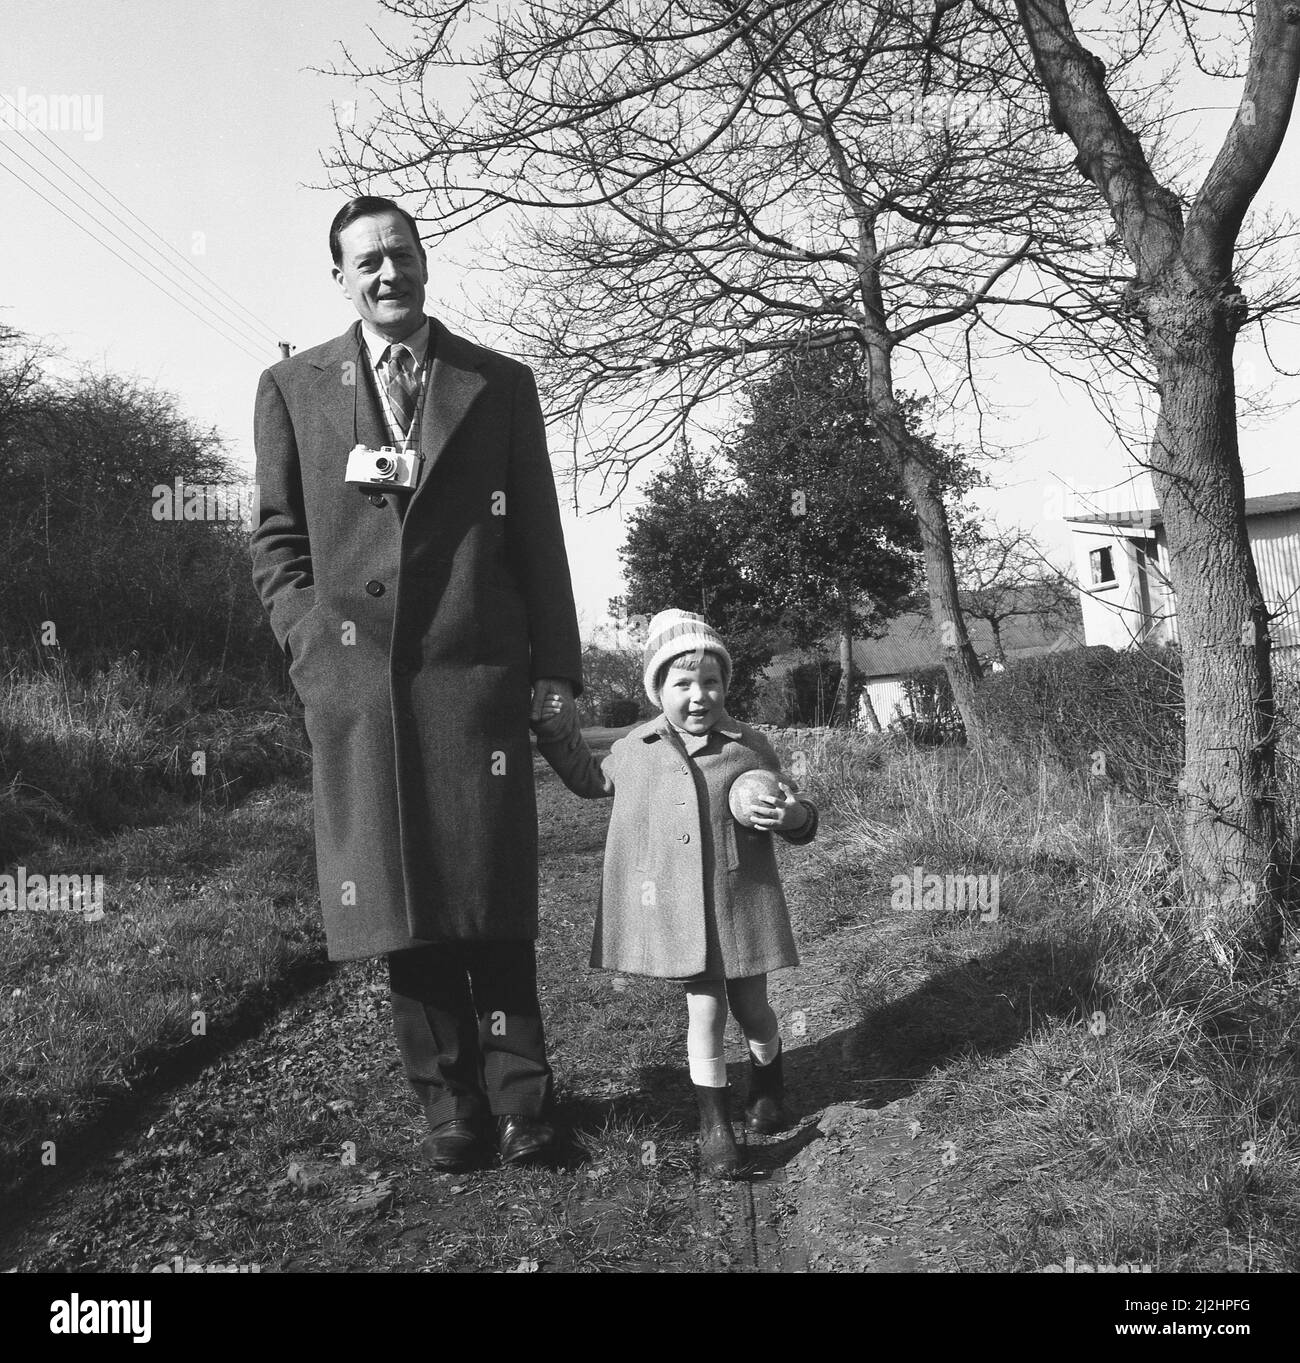 1950s, historical, a father out for a walk with young daughter, who in a coat and bobble hat is holding a small ball, England, UK. The man is wearing an overcoat and with a film camera hanging around his neck. Stock Photo